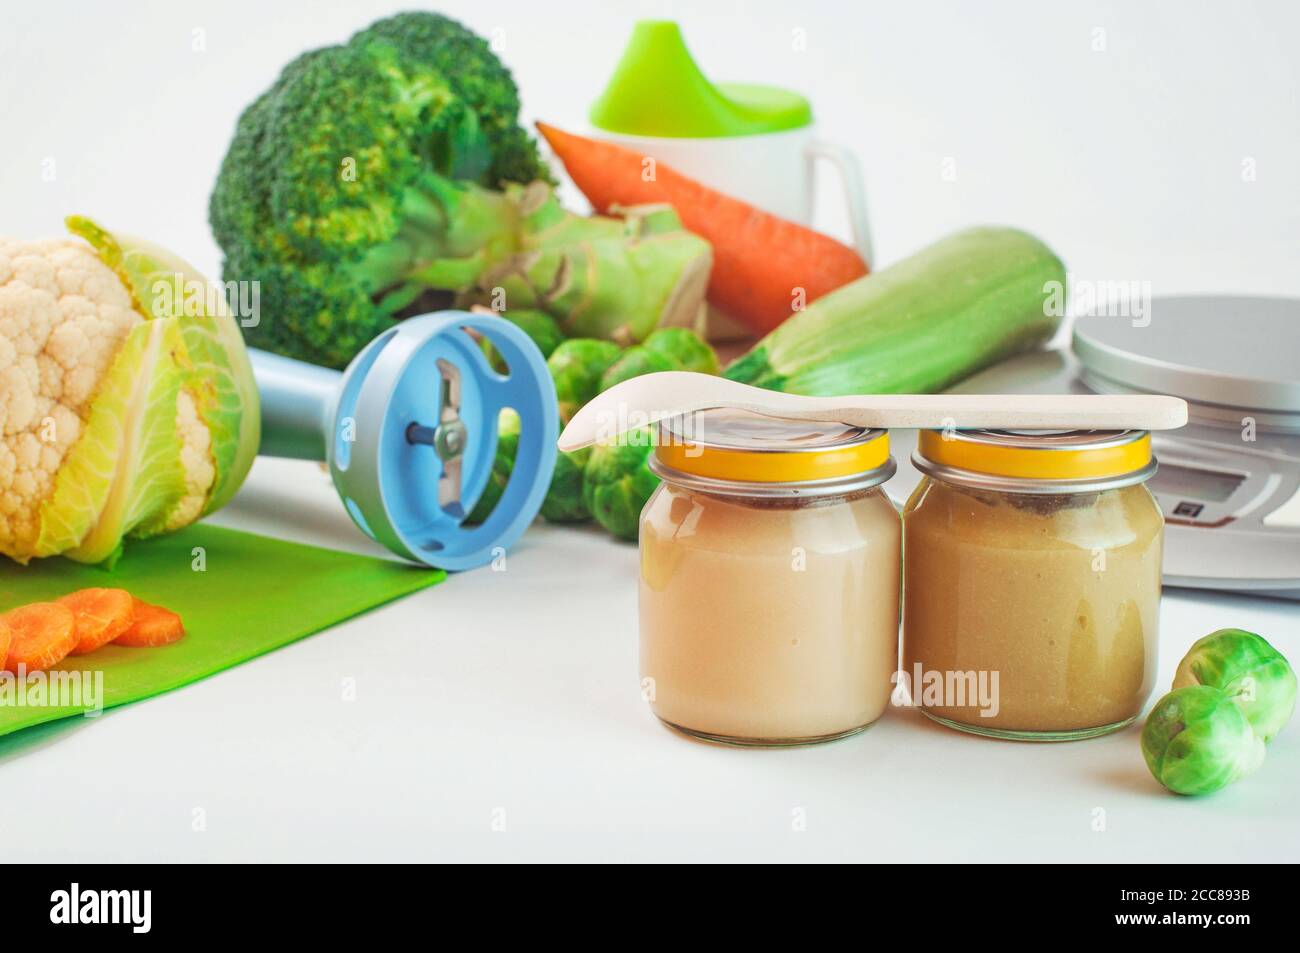 Glass jars with natural baby food on the table Stock Photo